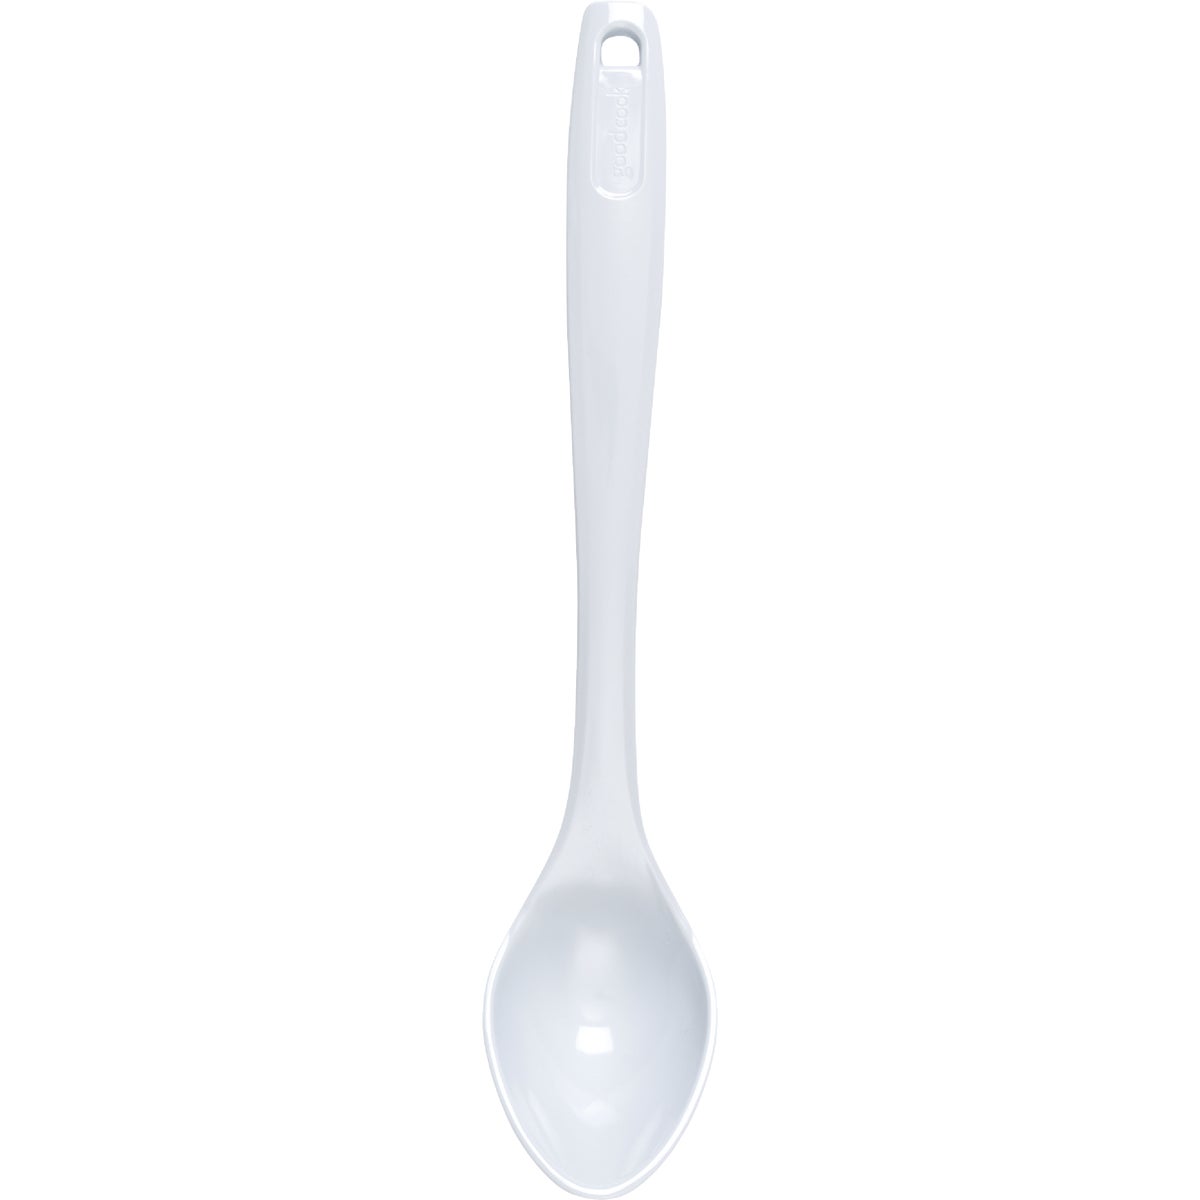 Item 641892, Perfect for mixing and serving sauces, stirring soups, and transferring hot